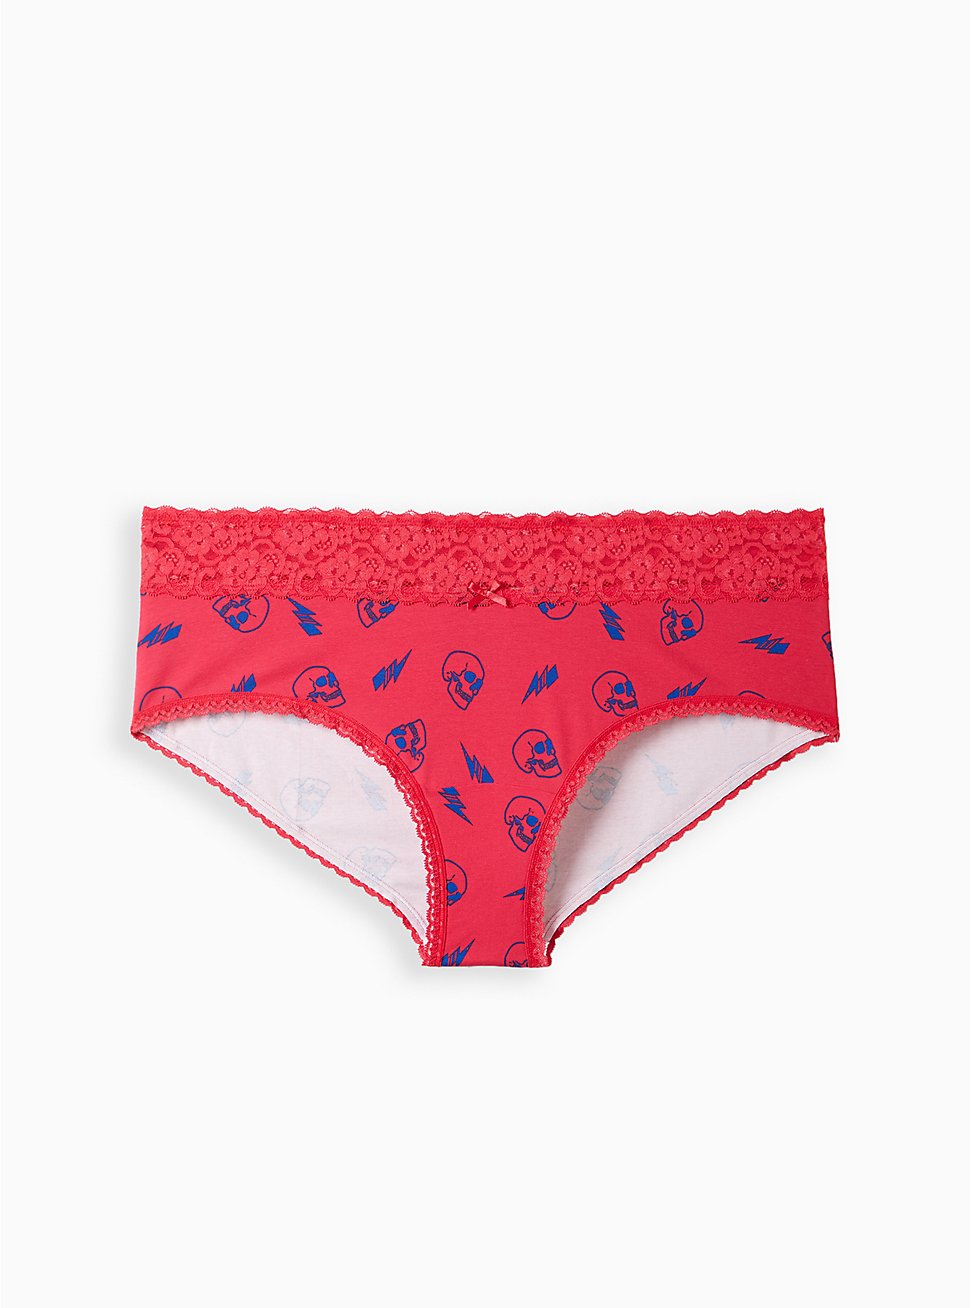 Cotton Mid-Rise Cheeky Lace Trim Panty, SKULL LIGHTNING PINK, hi-res